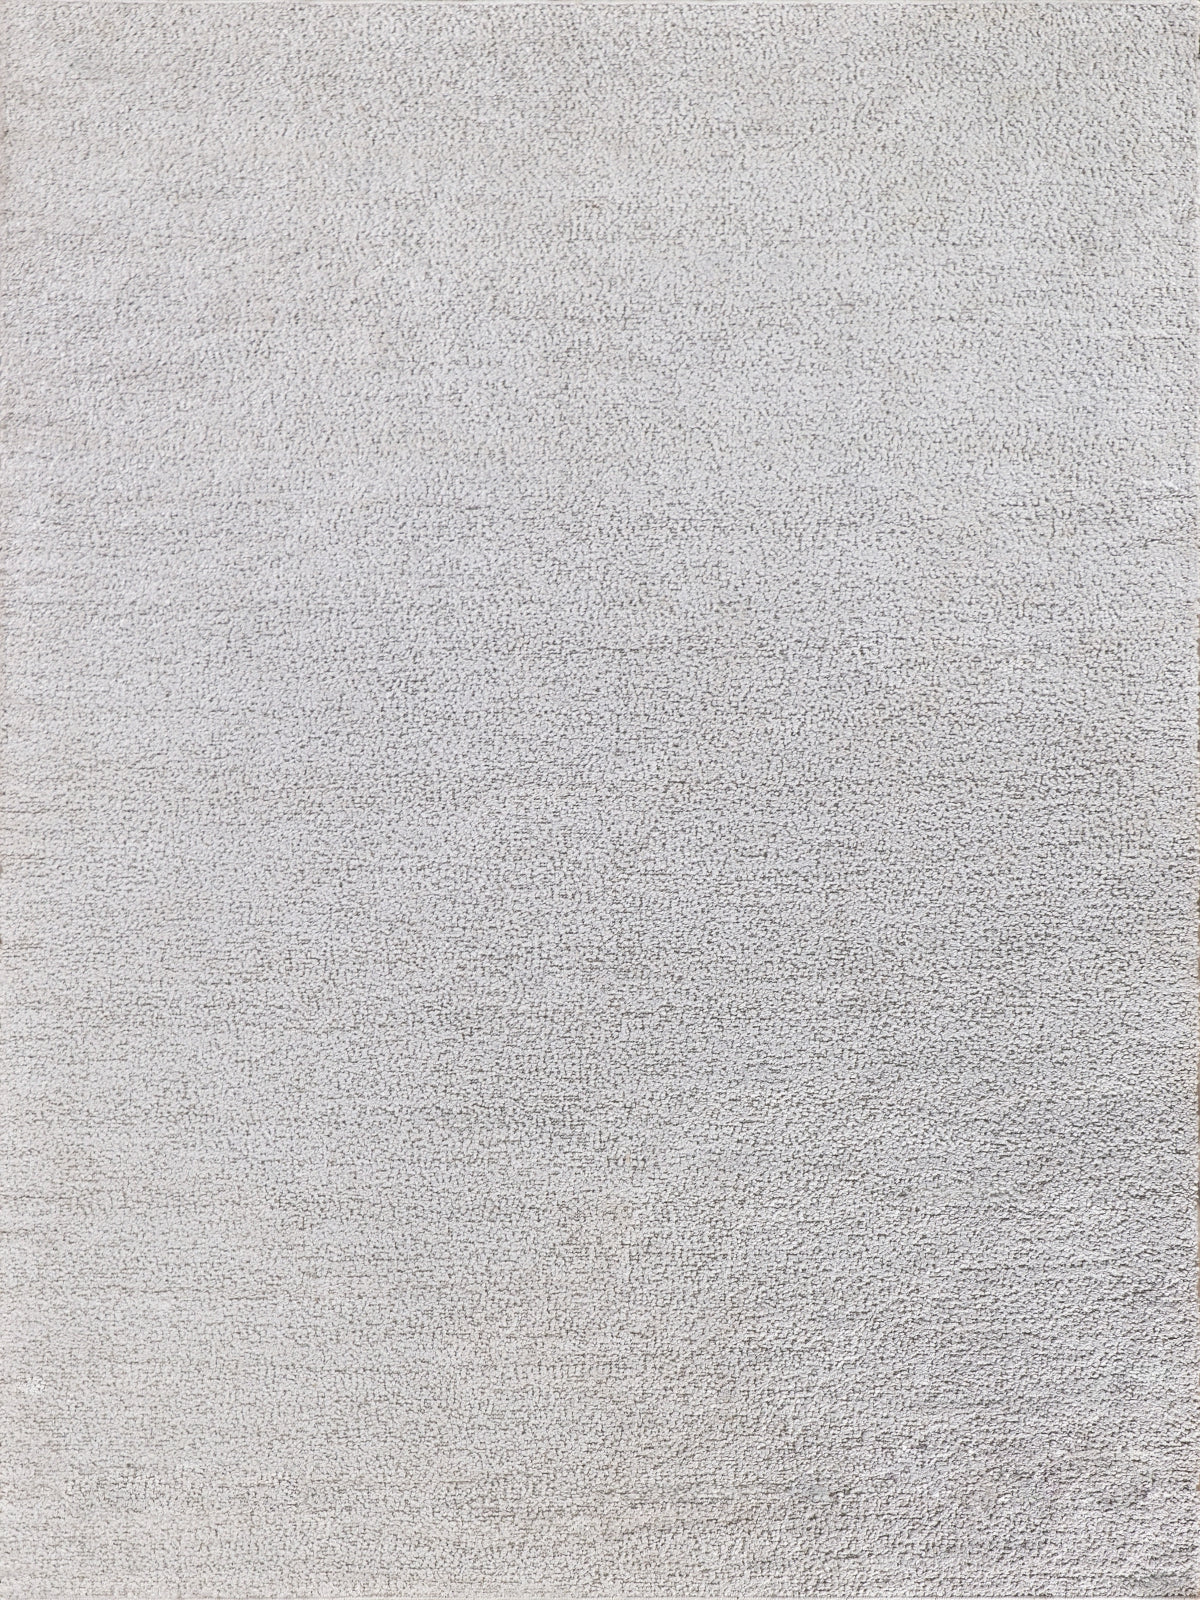 Exquisite Rugs Morello 4778 Ivory/Ivory Area Rug